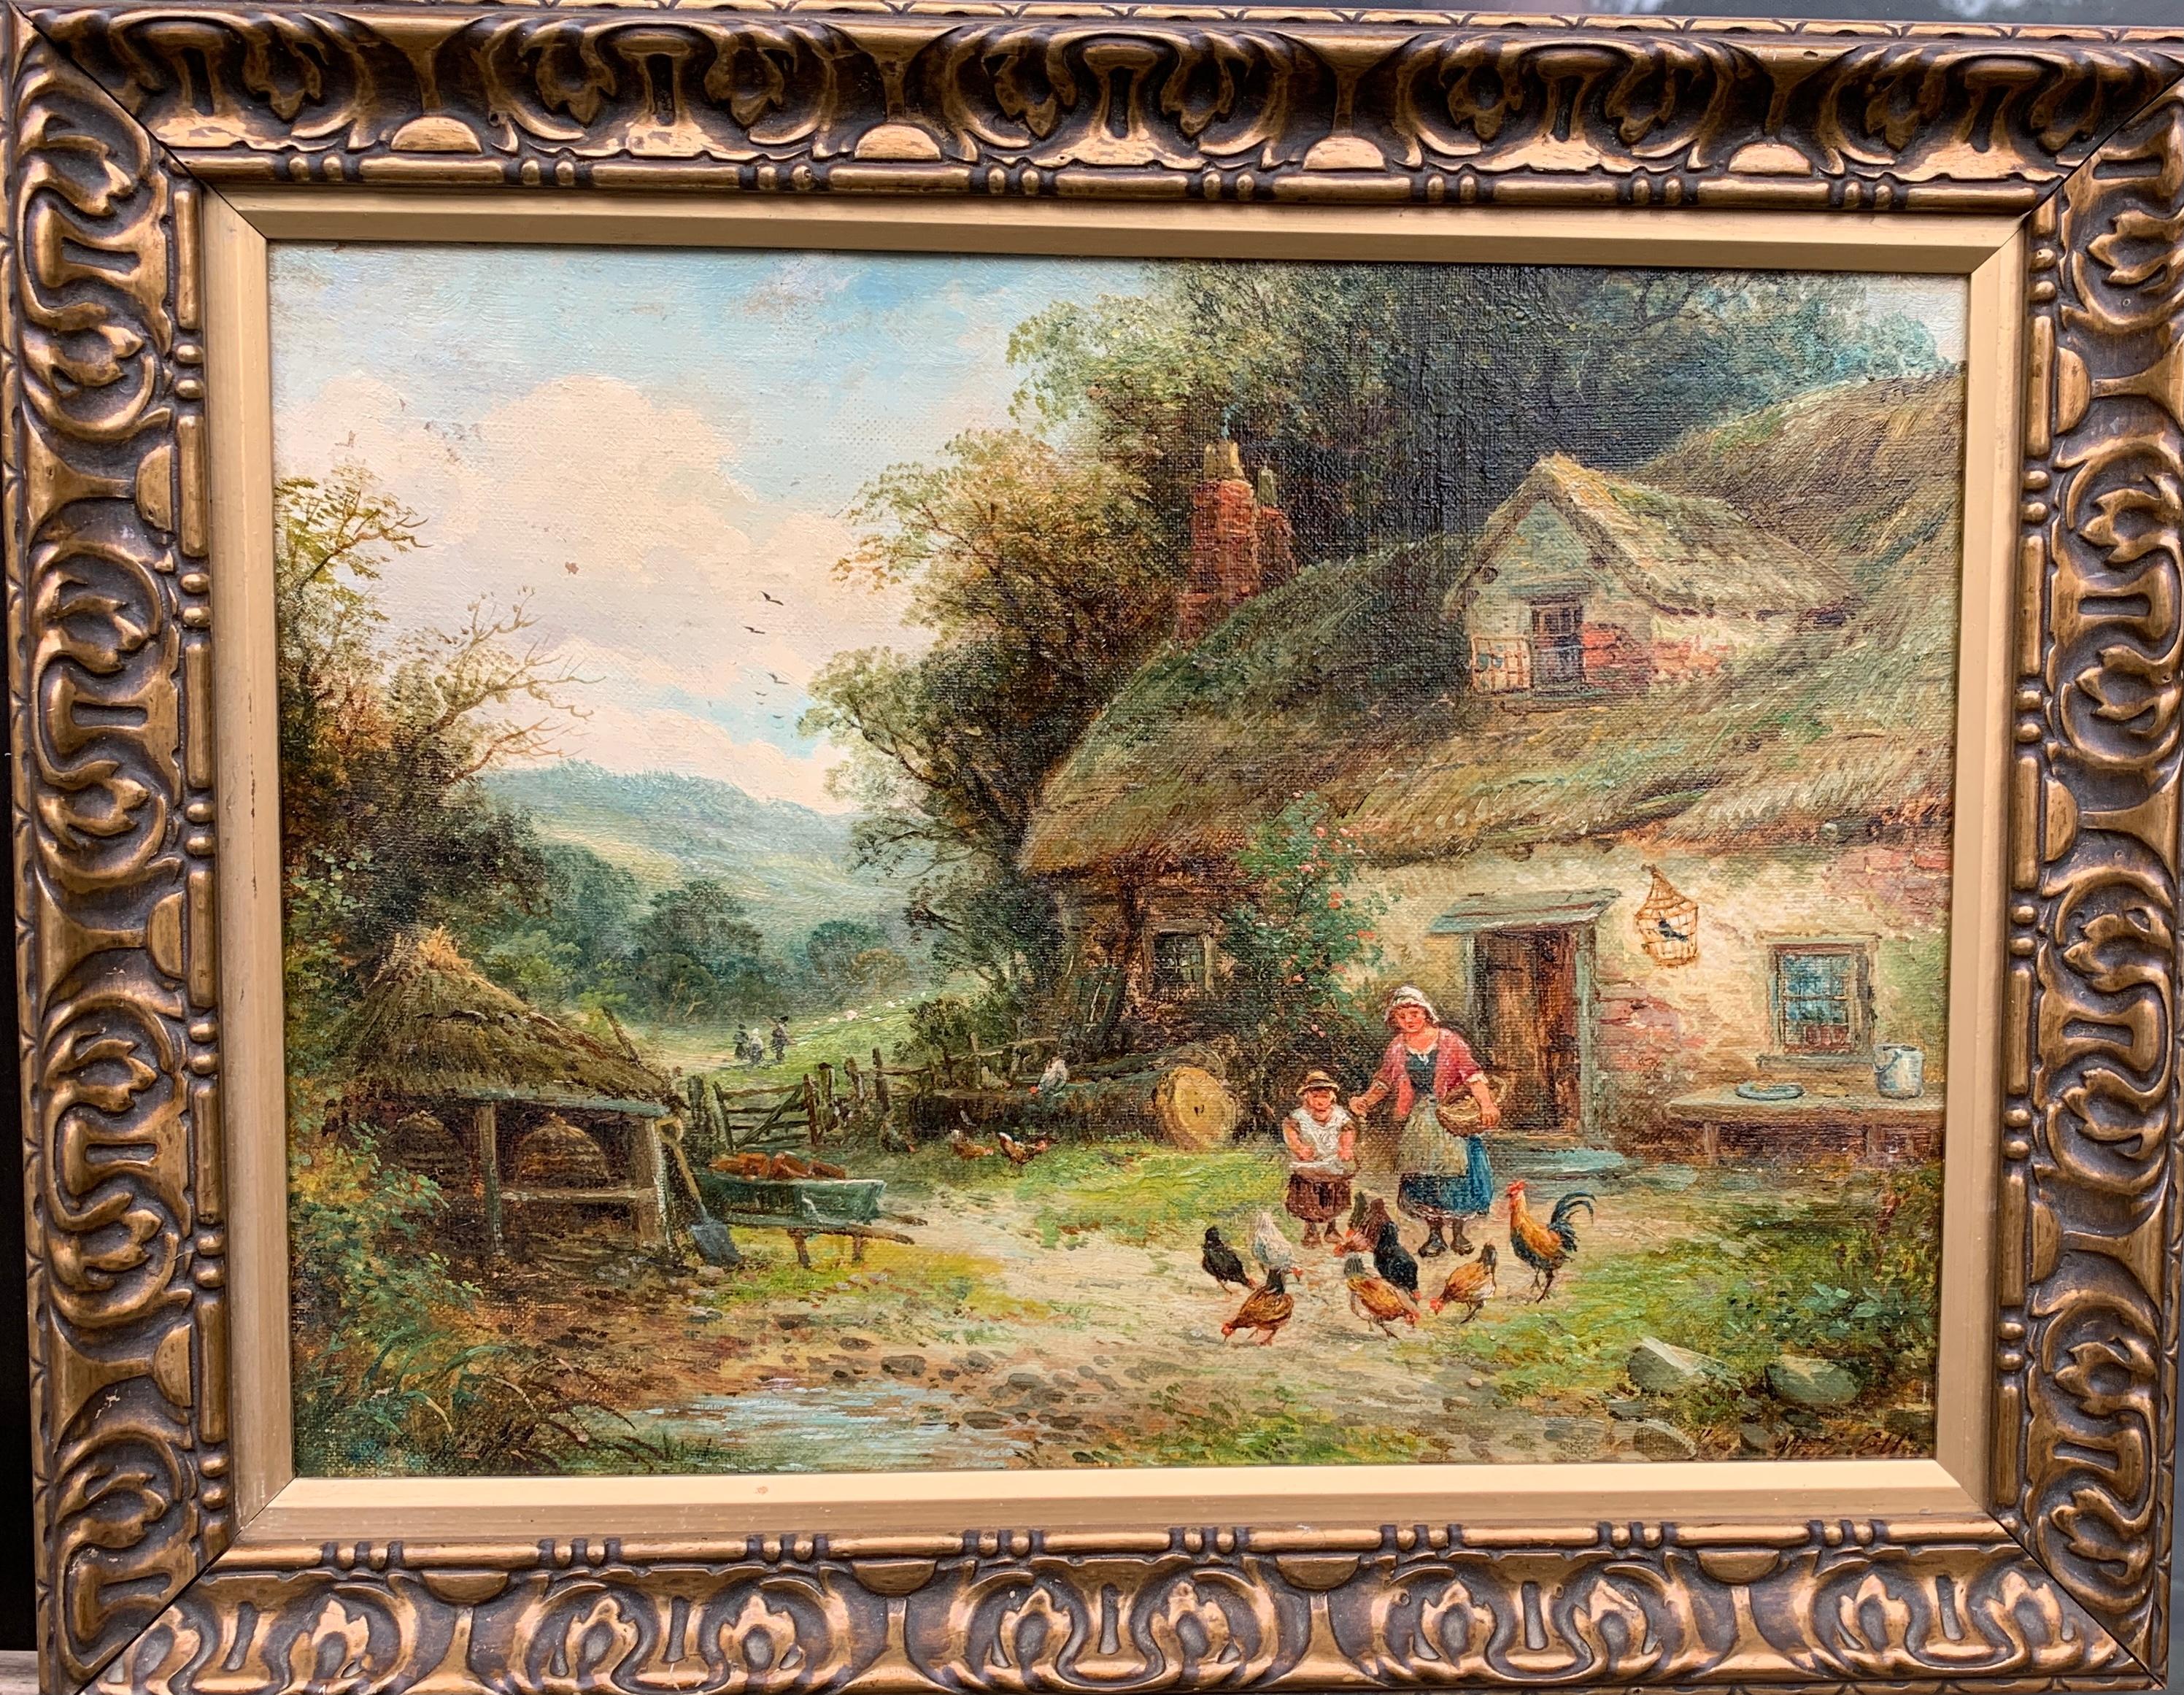 Walter Ellis Landscape Painting - 19th century English cottage landscape with mother and child feeding chickens